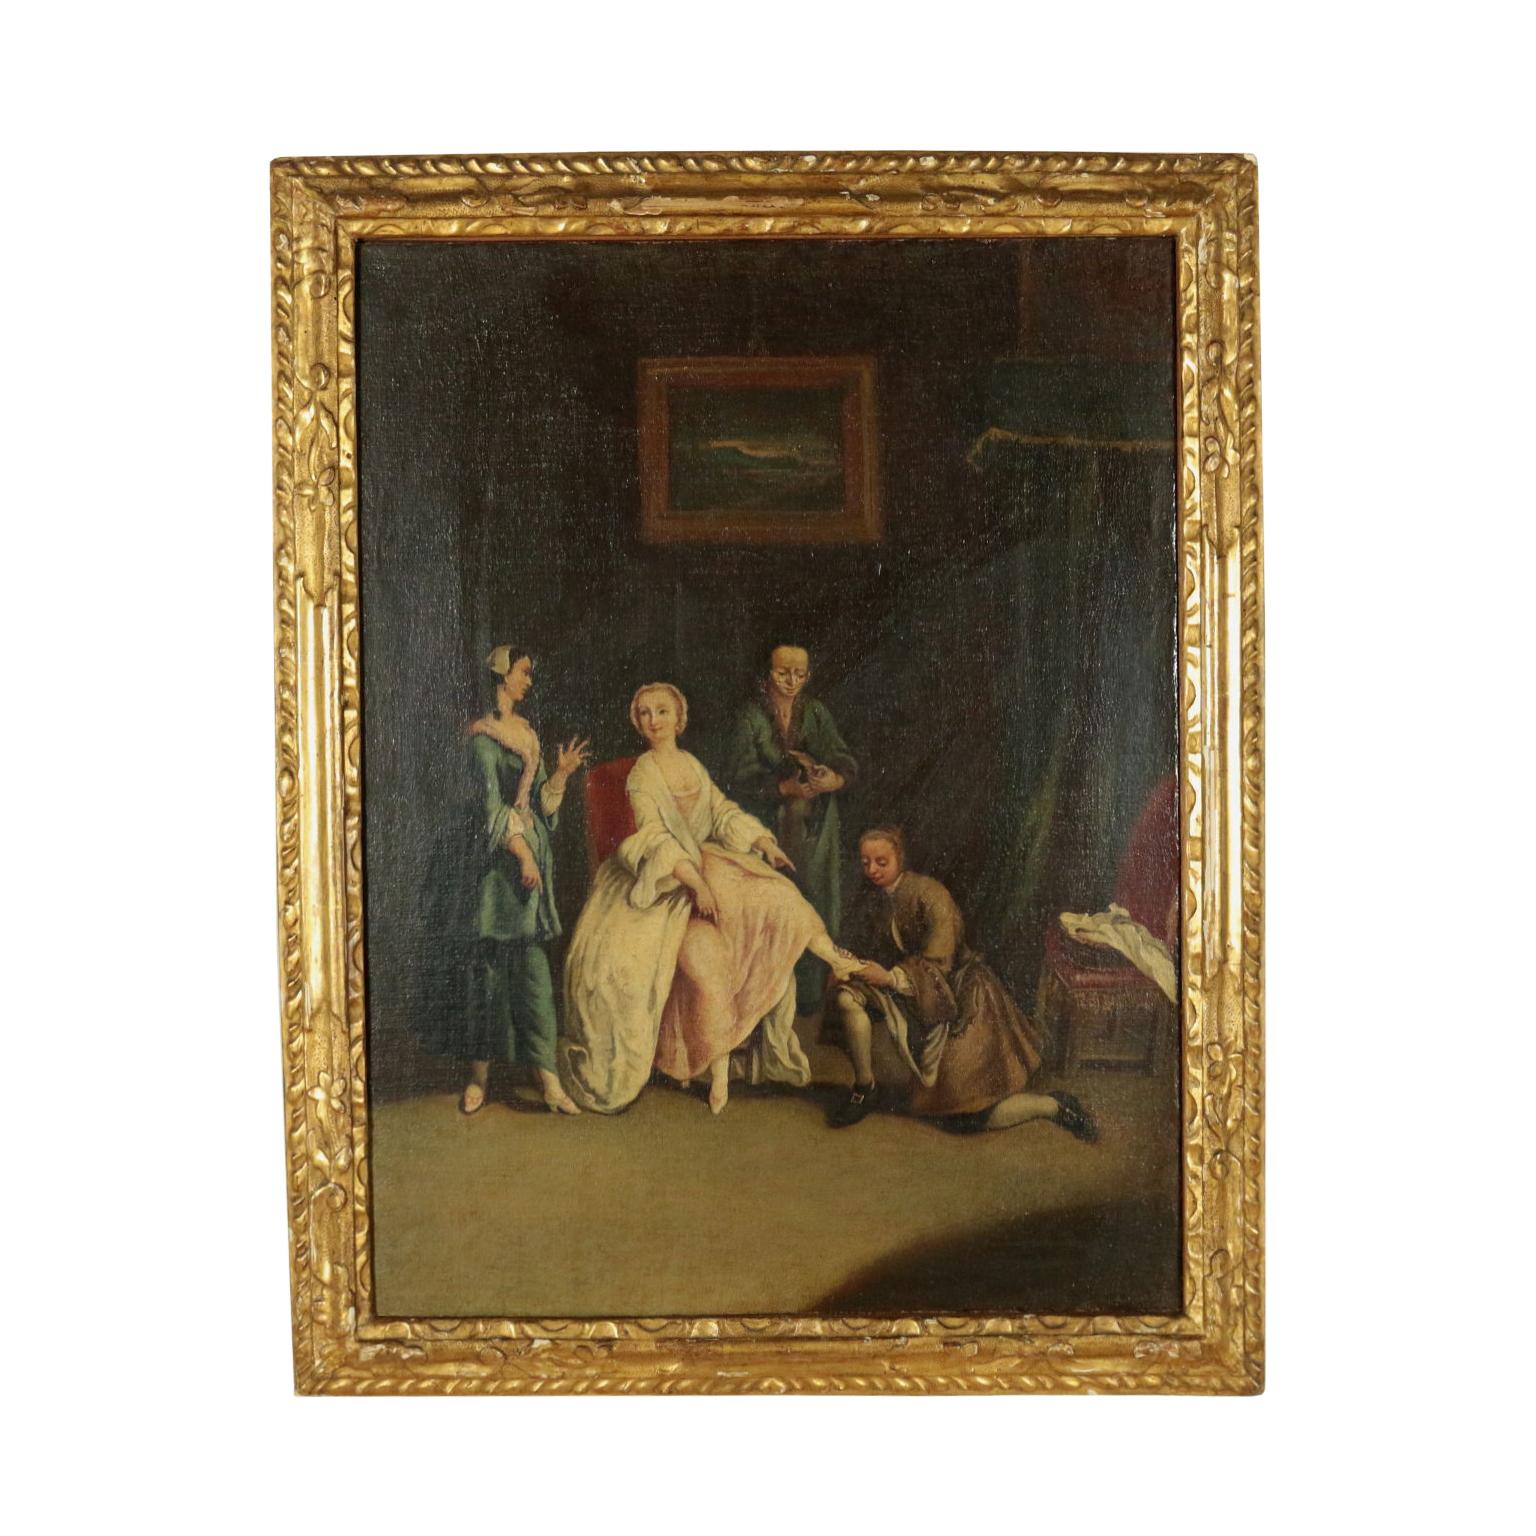 Unknown Figurative Painting - Scope Of Pietro Longhi Oil On Canvas Second Half '700, Trying on the shoe